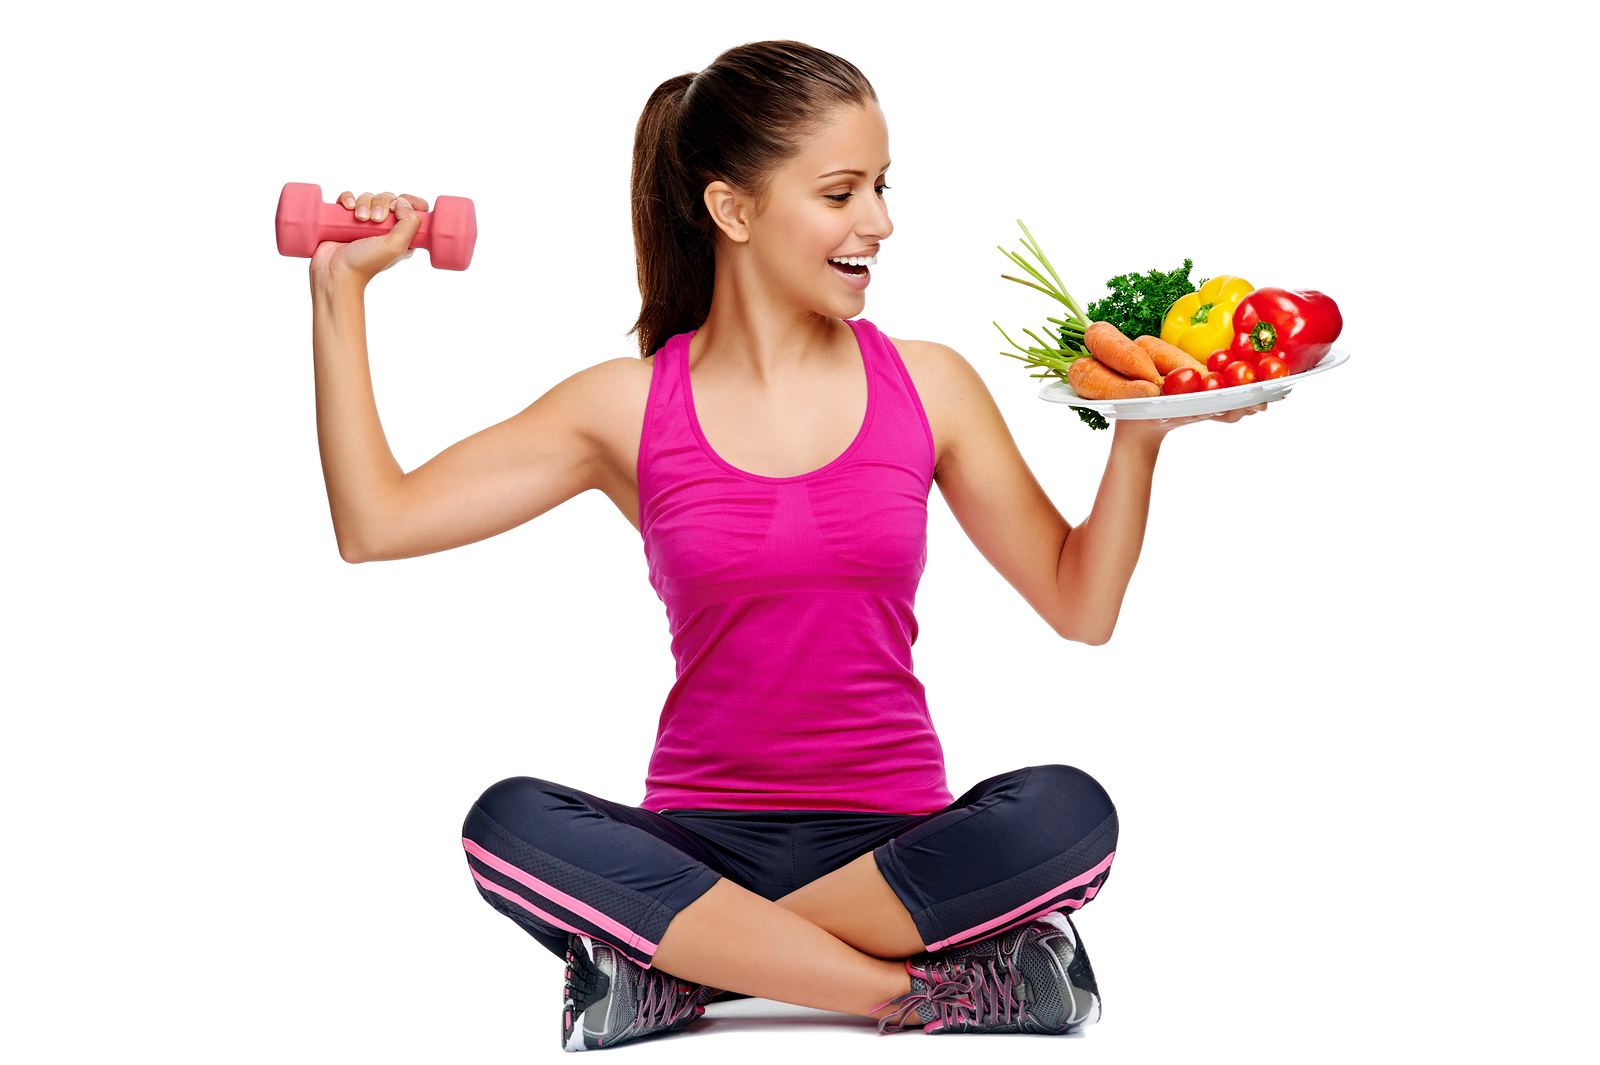 healthy eating and exercise for weightloss diet concept